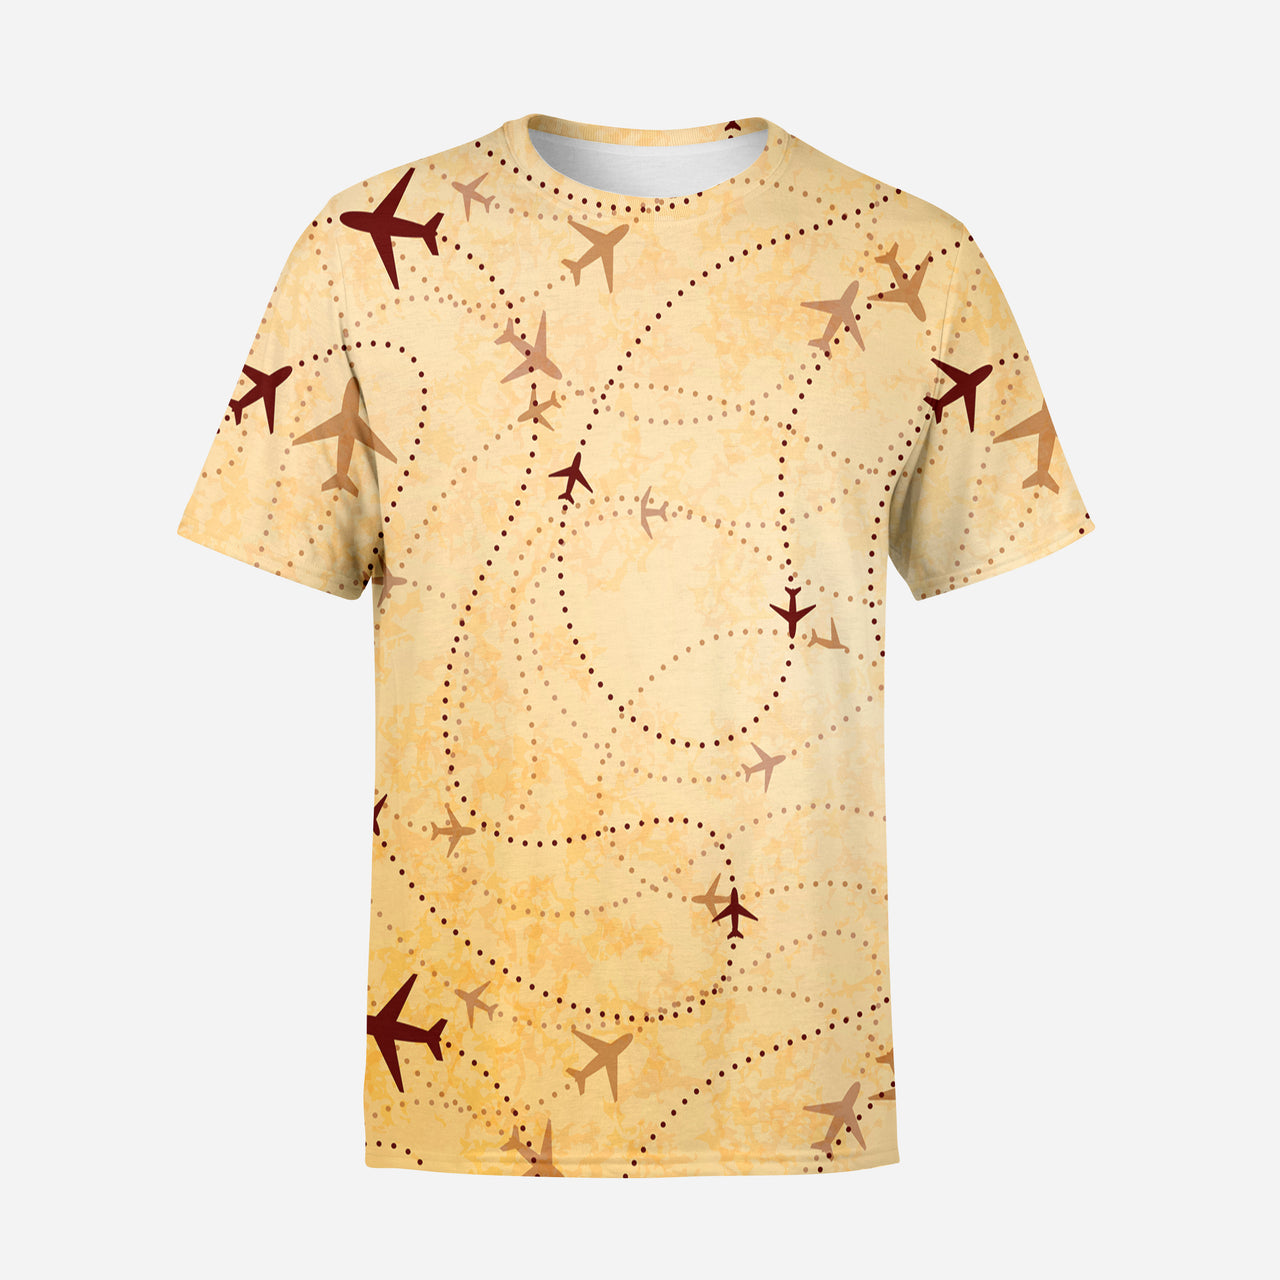 Vintage Travelling with Aircraft Designed 3D T-Shirts